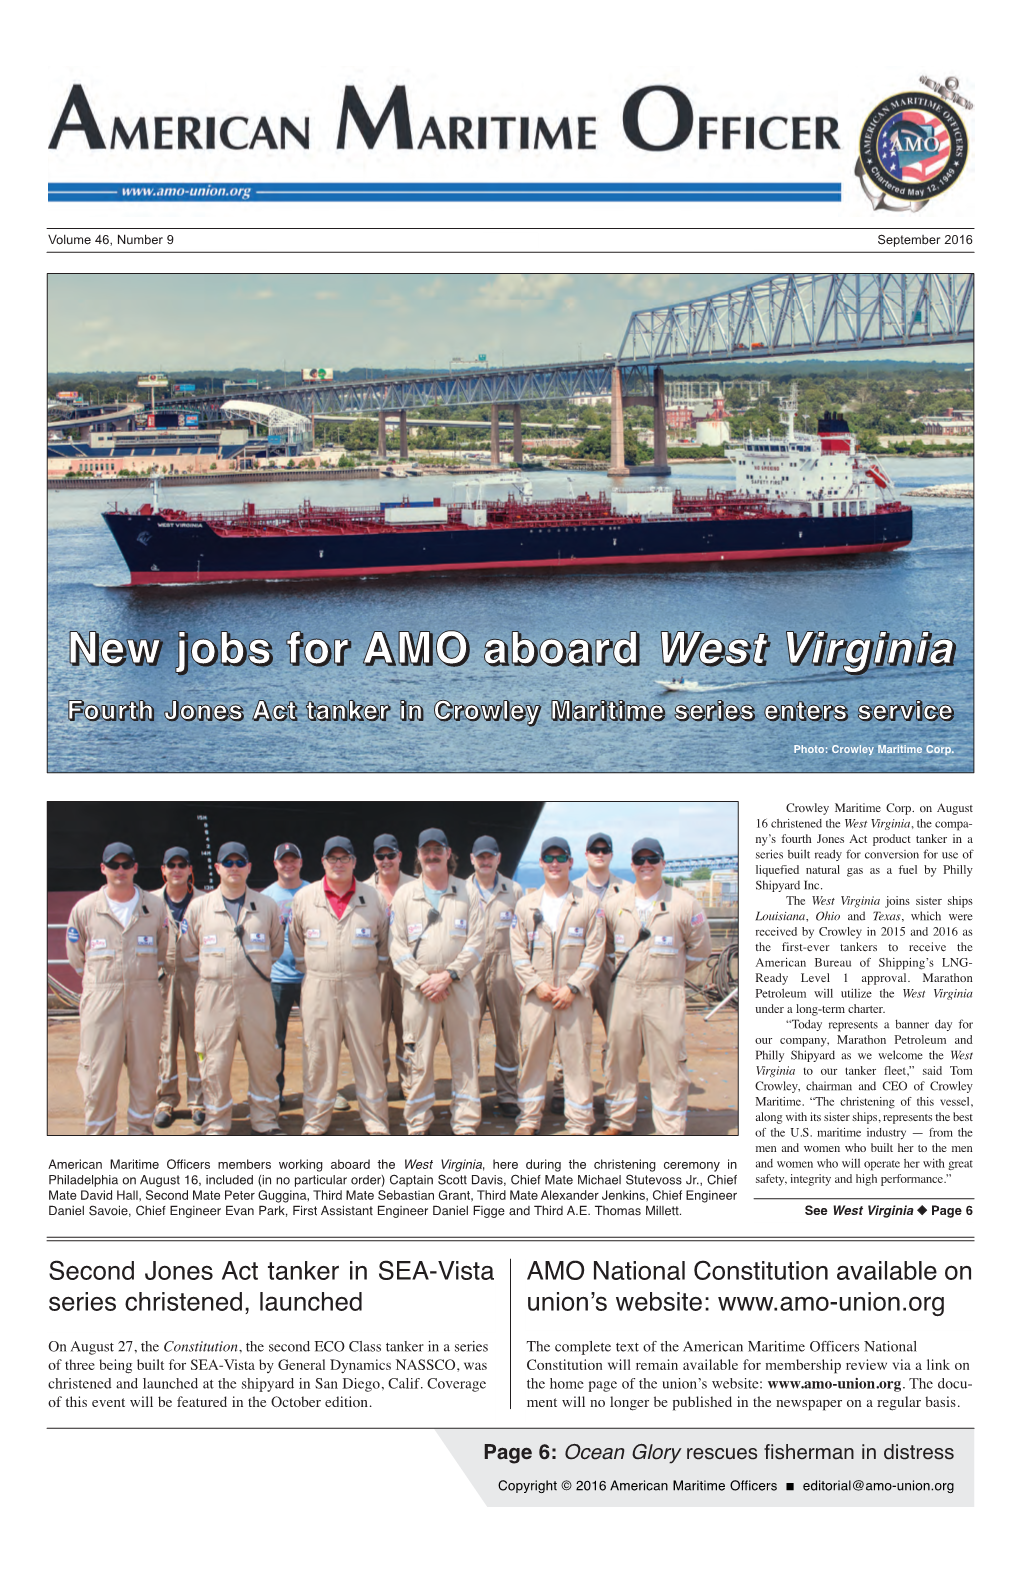 New Jobs for AMO Aboard West Virginia Fourth Jones Act Tanker In